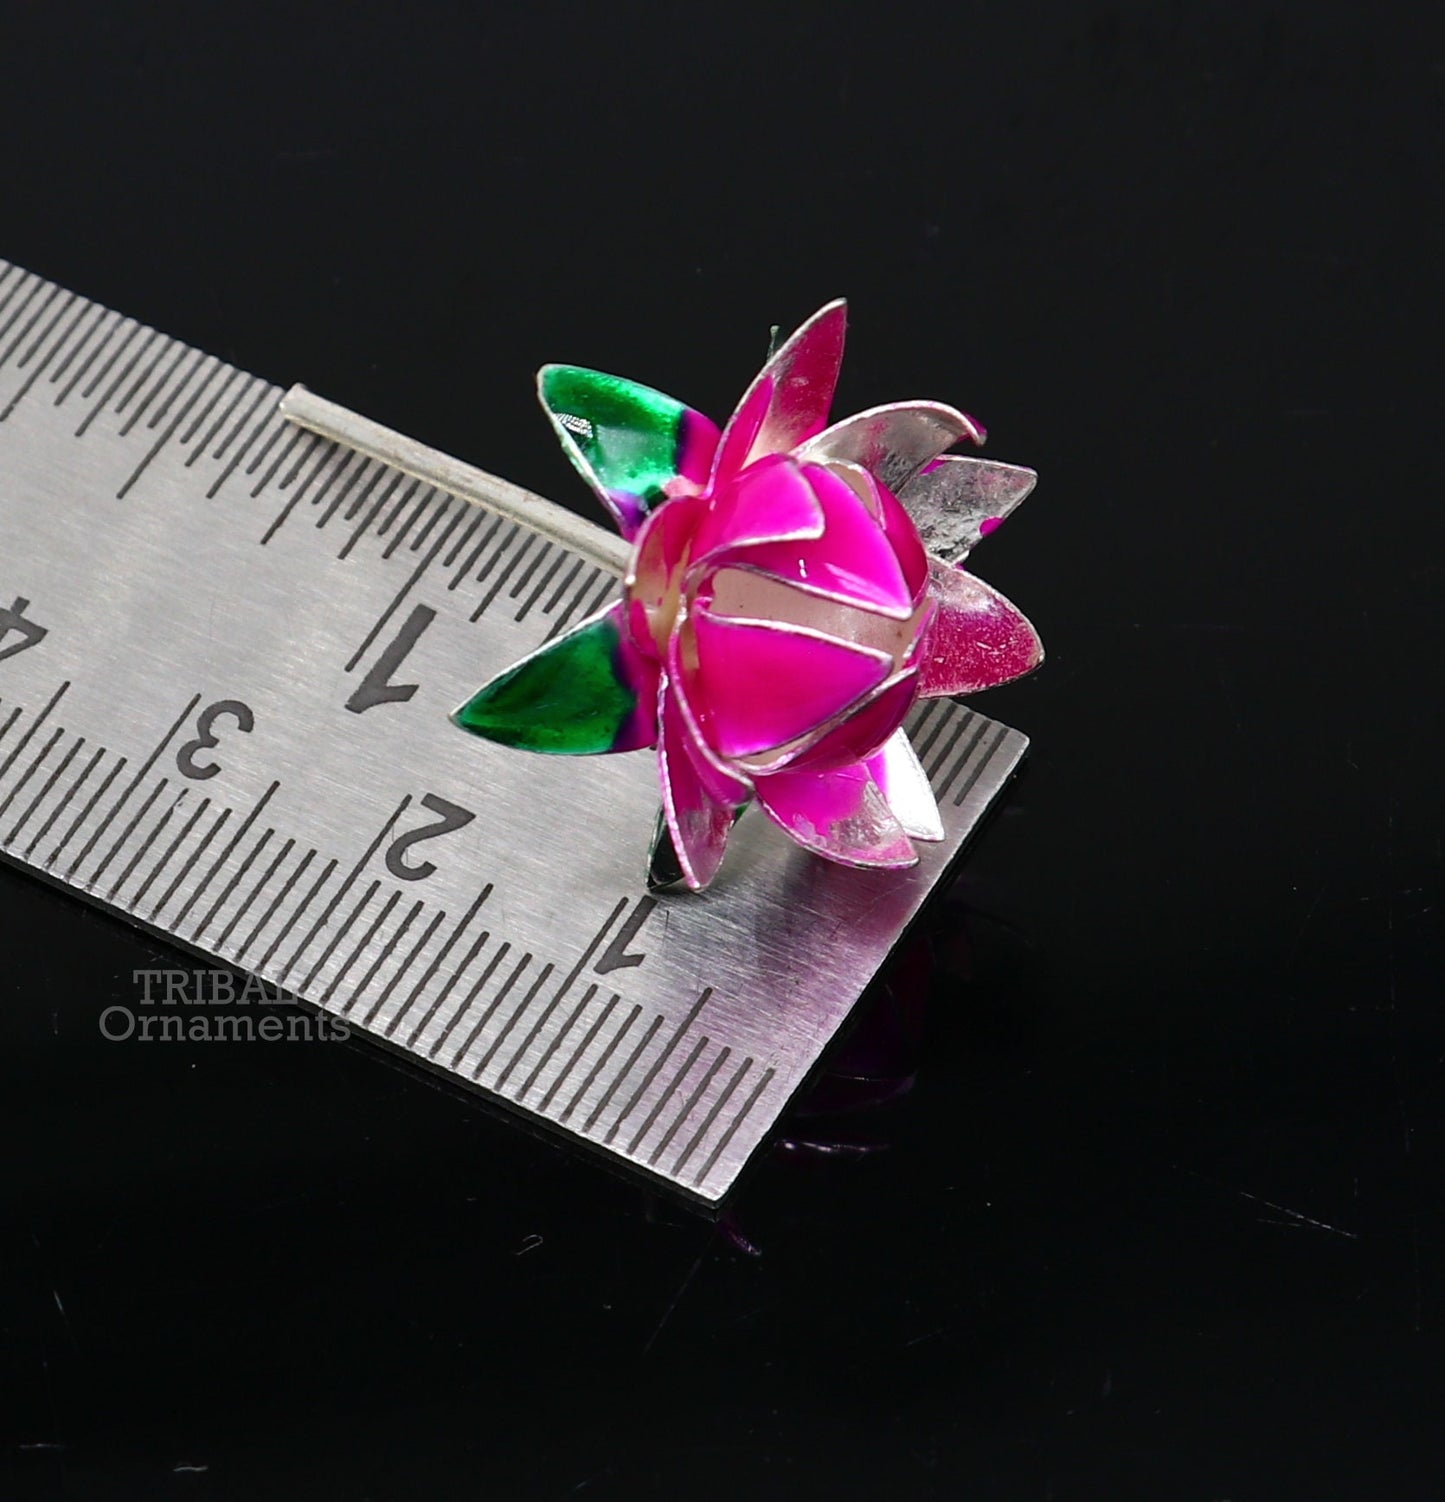 925 sterling silver handmade small lotus flower puja god temple article, excellent customized enamel silver worshipping articles su0744 - TRIBAL ORNAMENTS